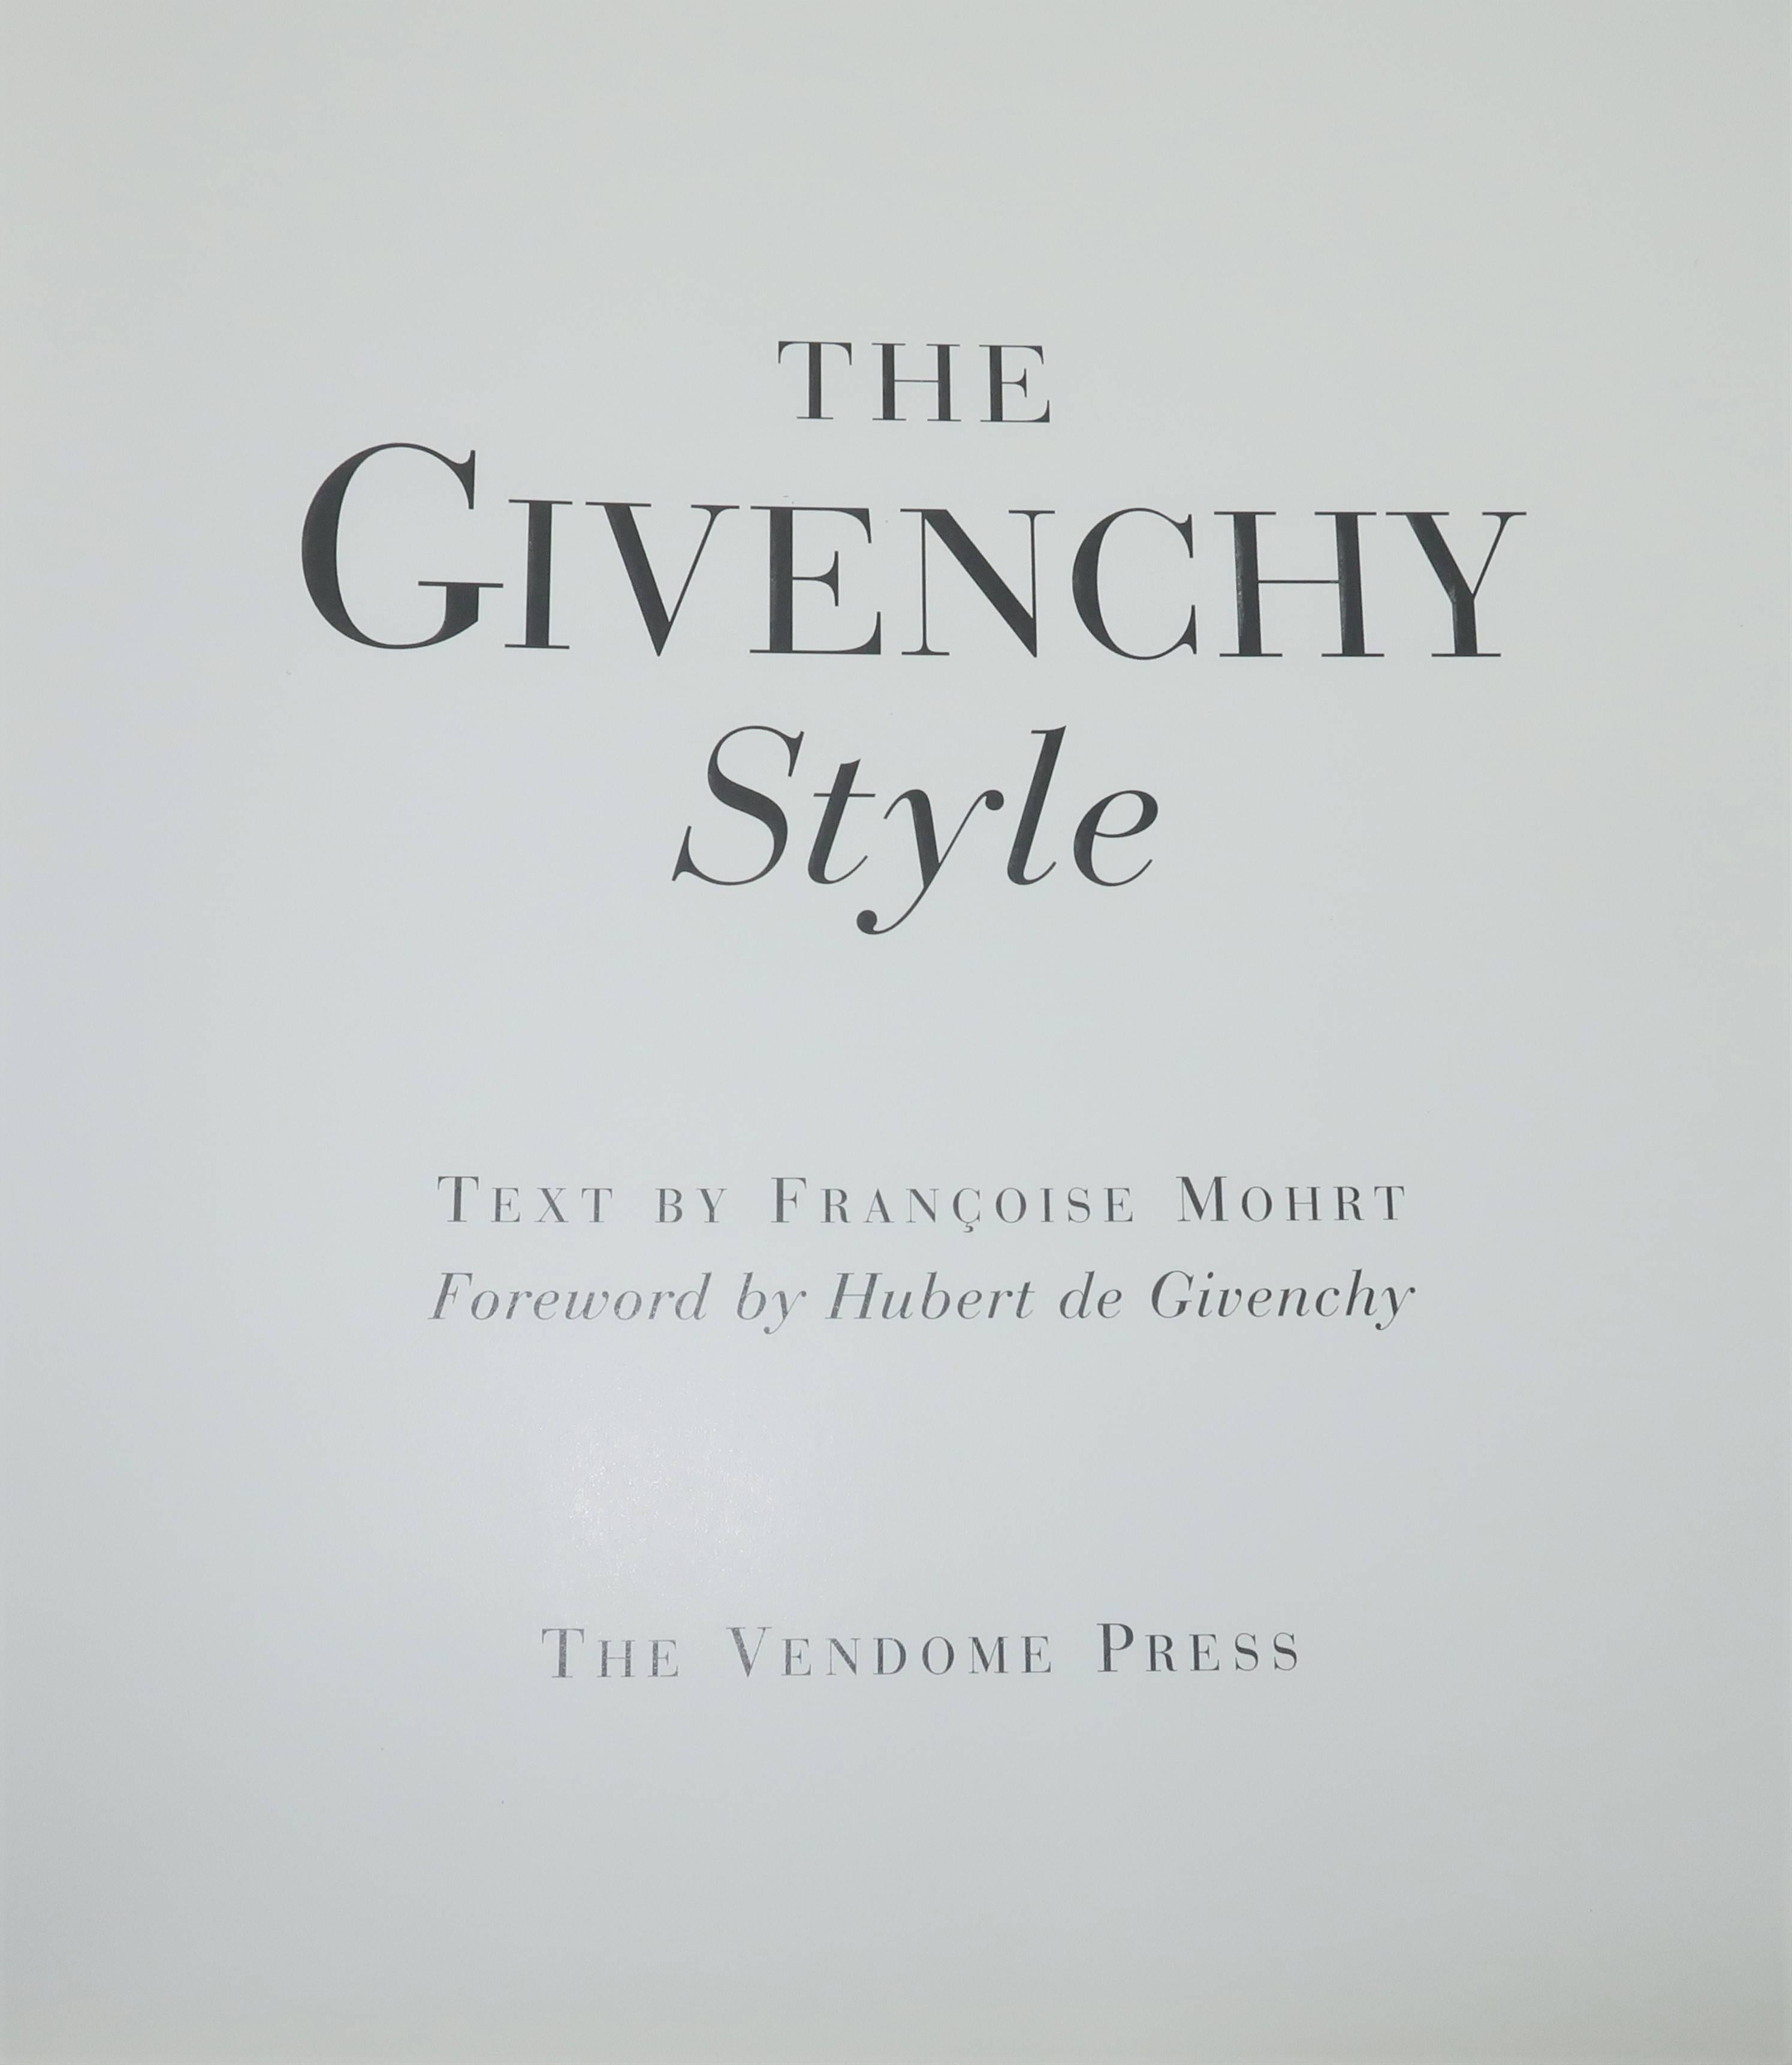 the givenchy style book